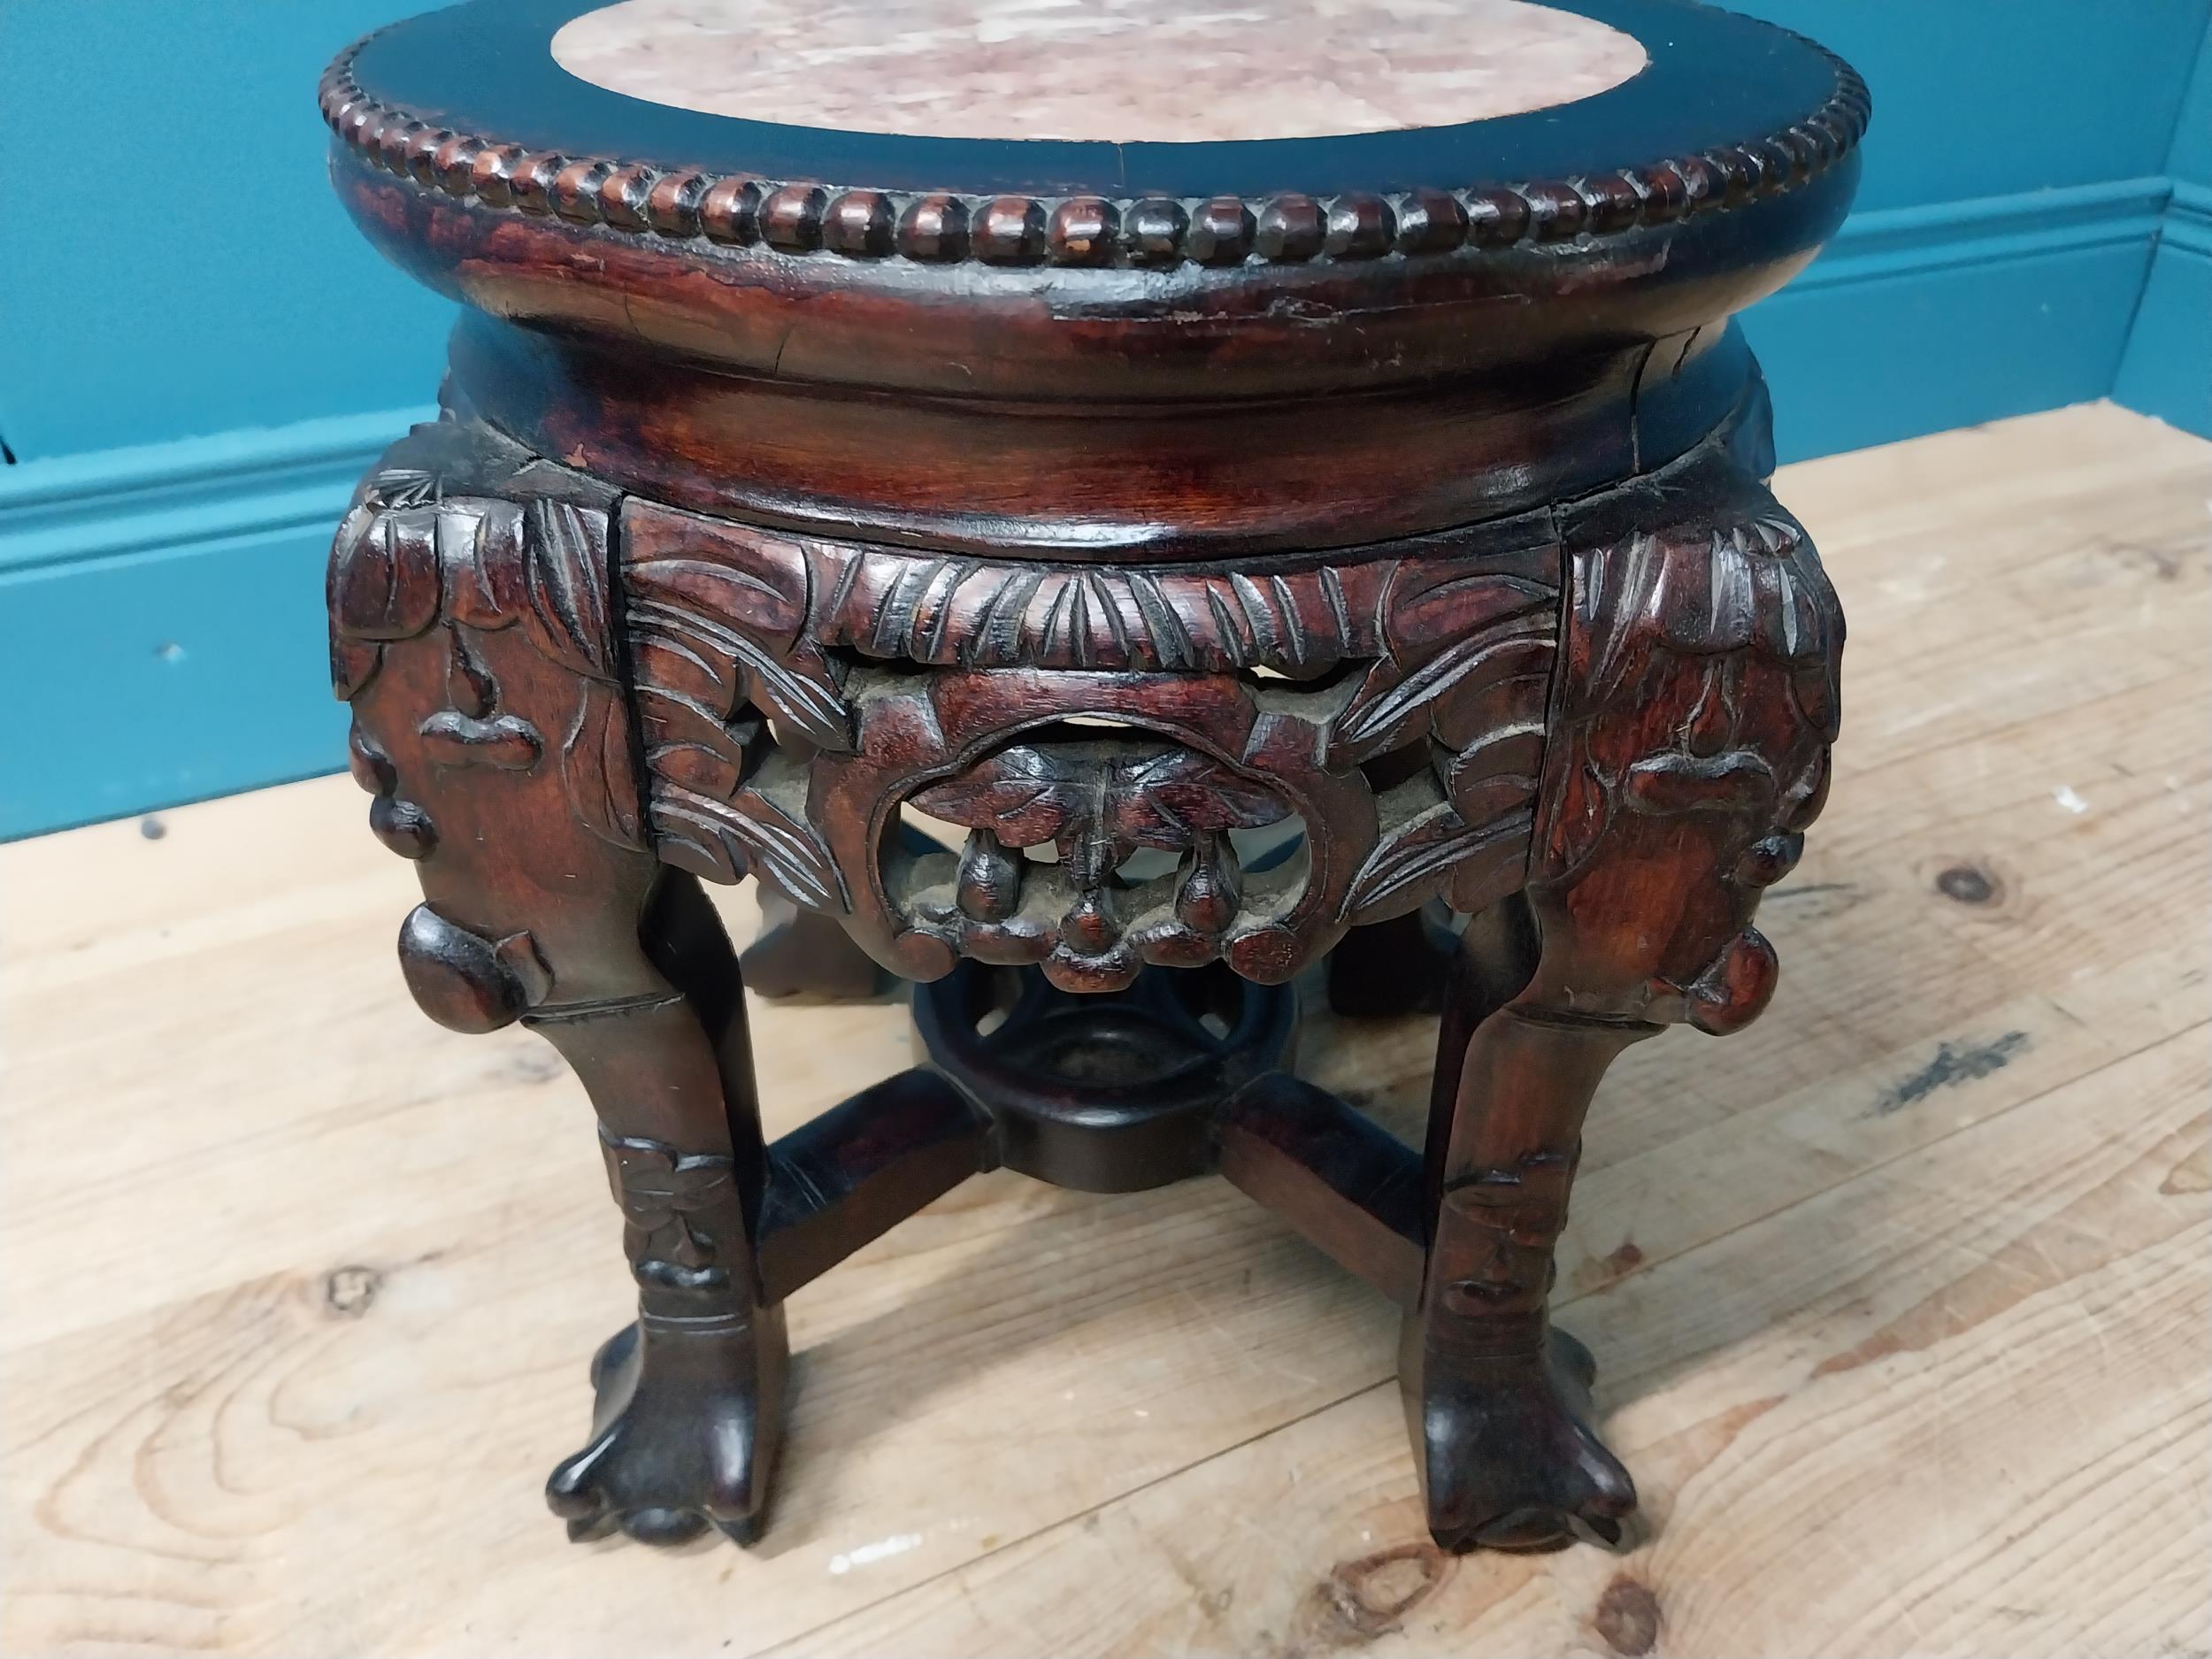 Carved hardwood jardiniere stand with inset marble top in the Chinese style. {34 cm H x 30 cm Diam} - Image 4 of 5